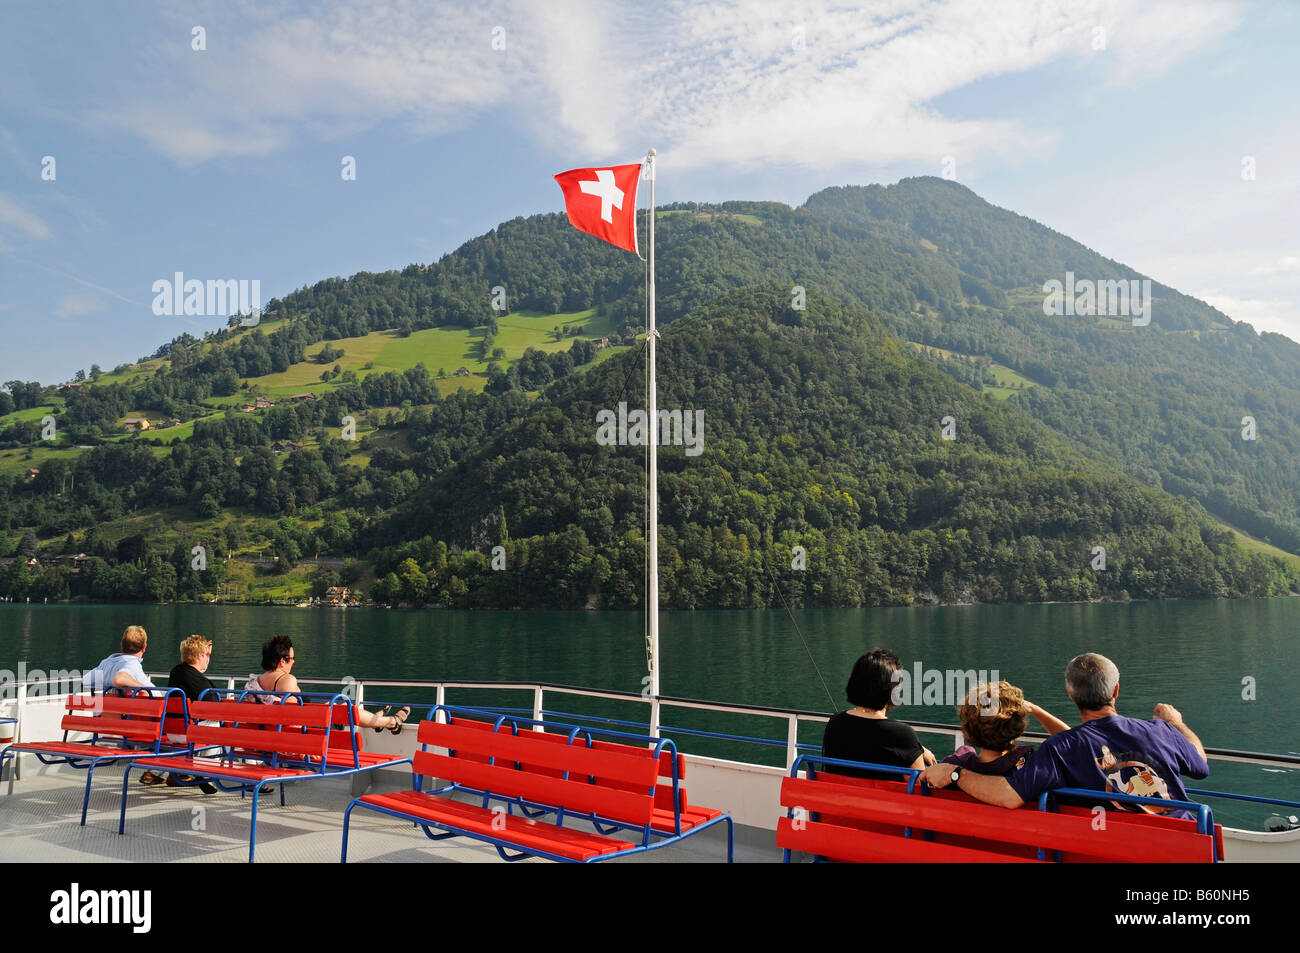 People, Swiss flag, car-ferry on its way from Beckenried to Gersau, mountains, Vierwaldstaettersee or Lake Lucerne Stock Photo